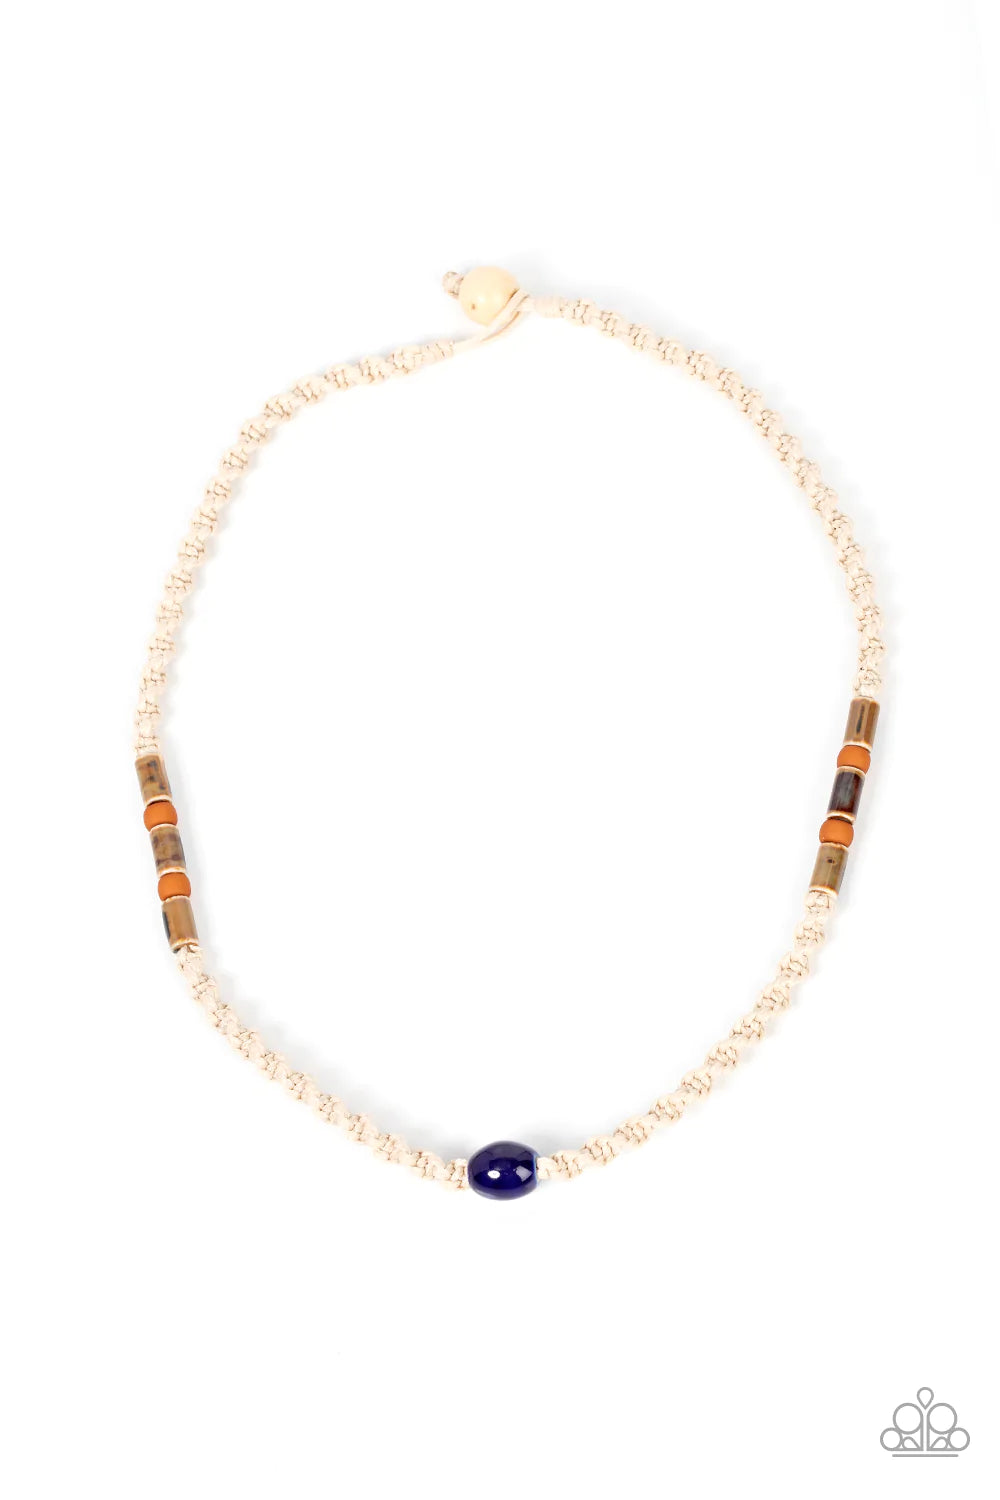 Positively Pacific - Blue Urban Necklace